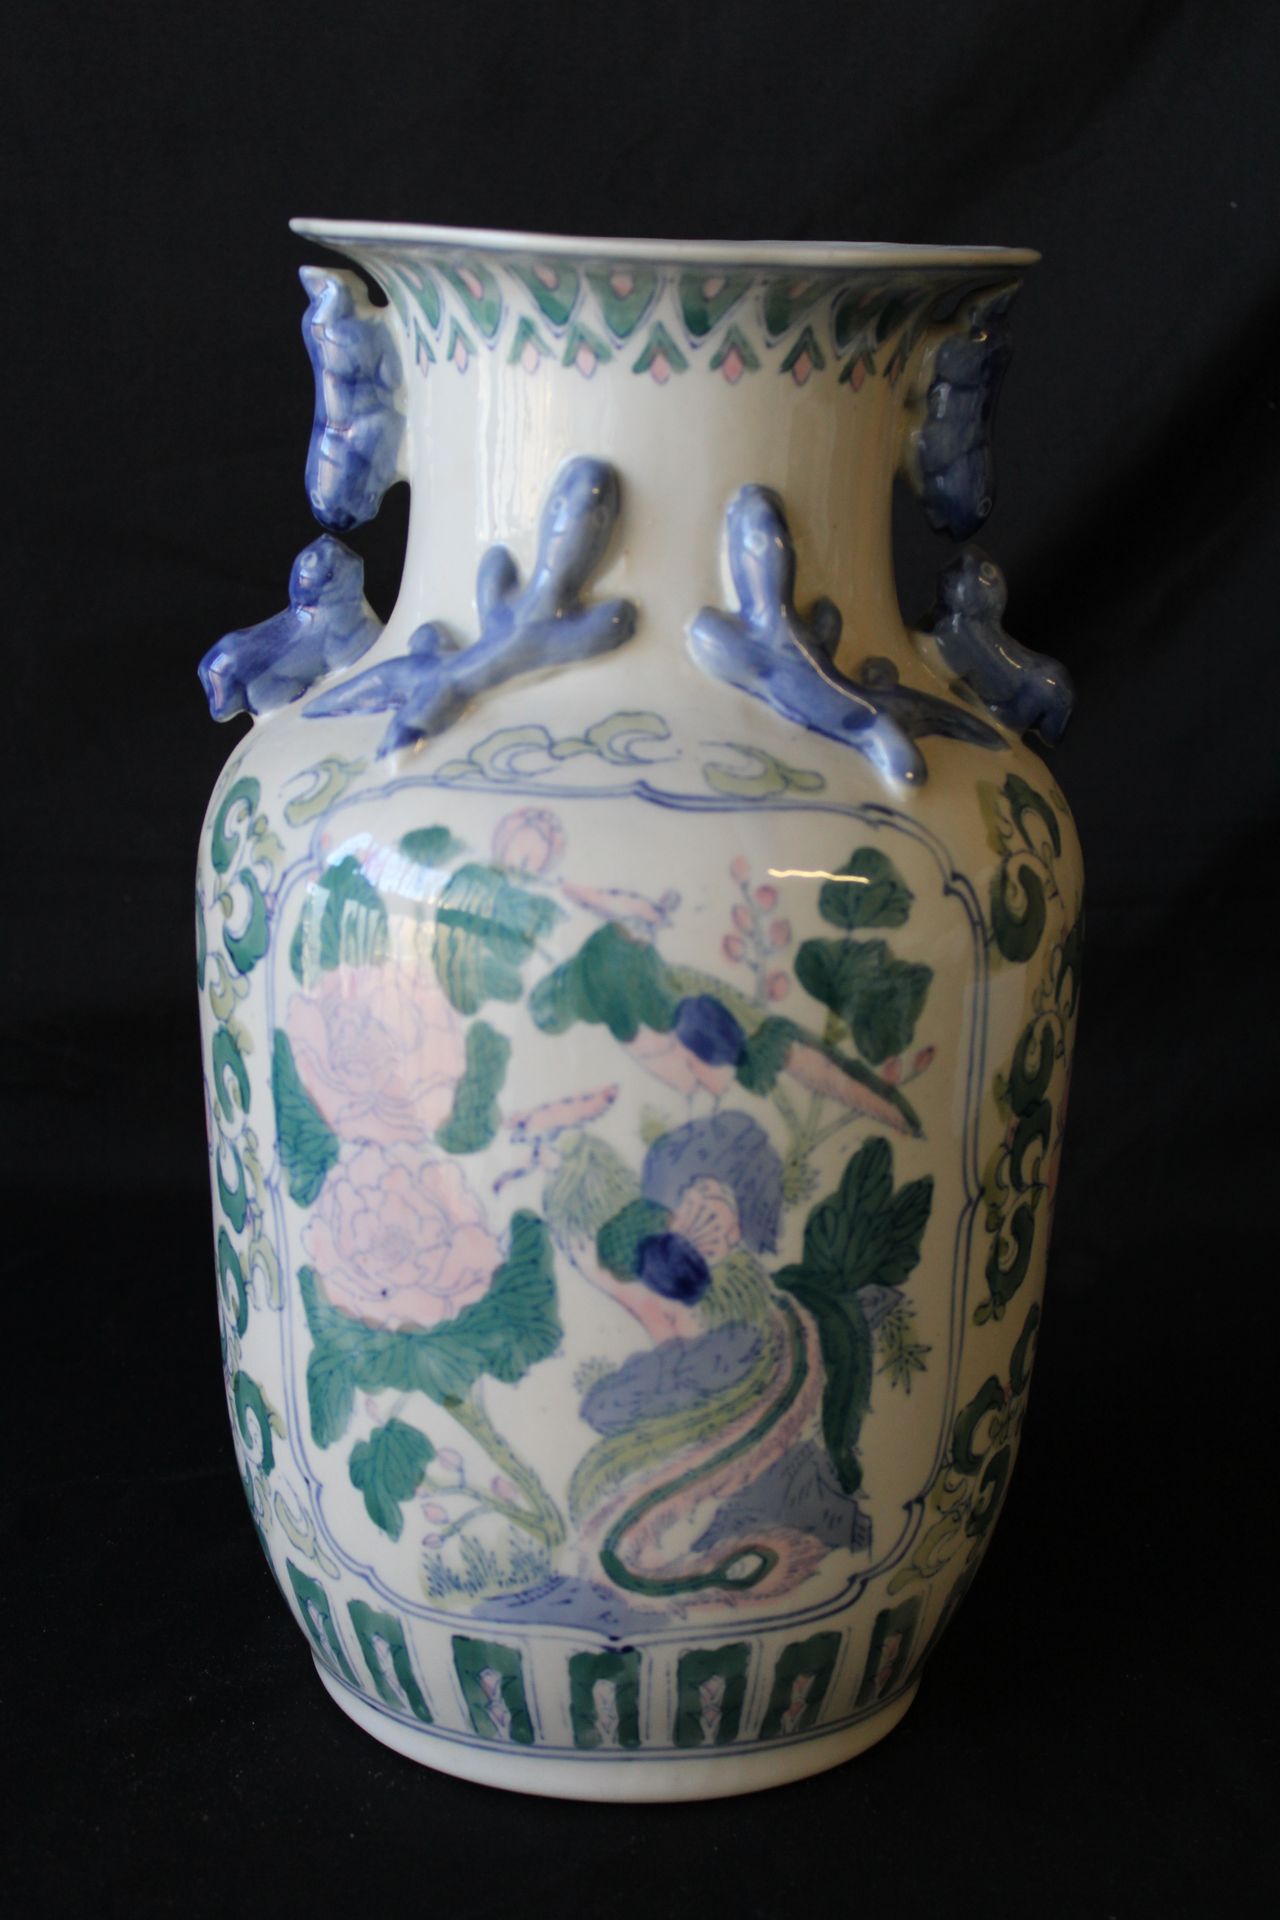 Null Ceramic vase decorated with flowers and foliage, blue/green/pink tone